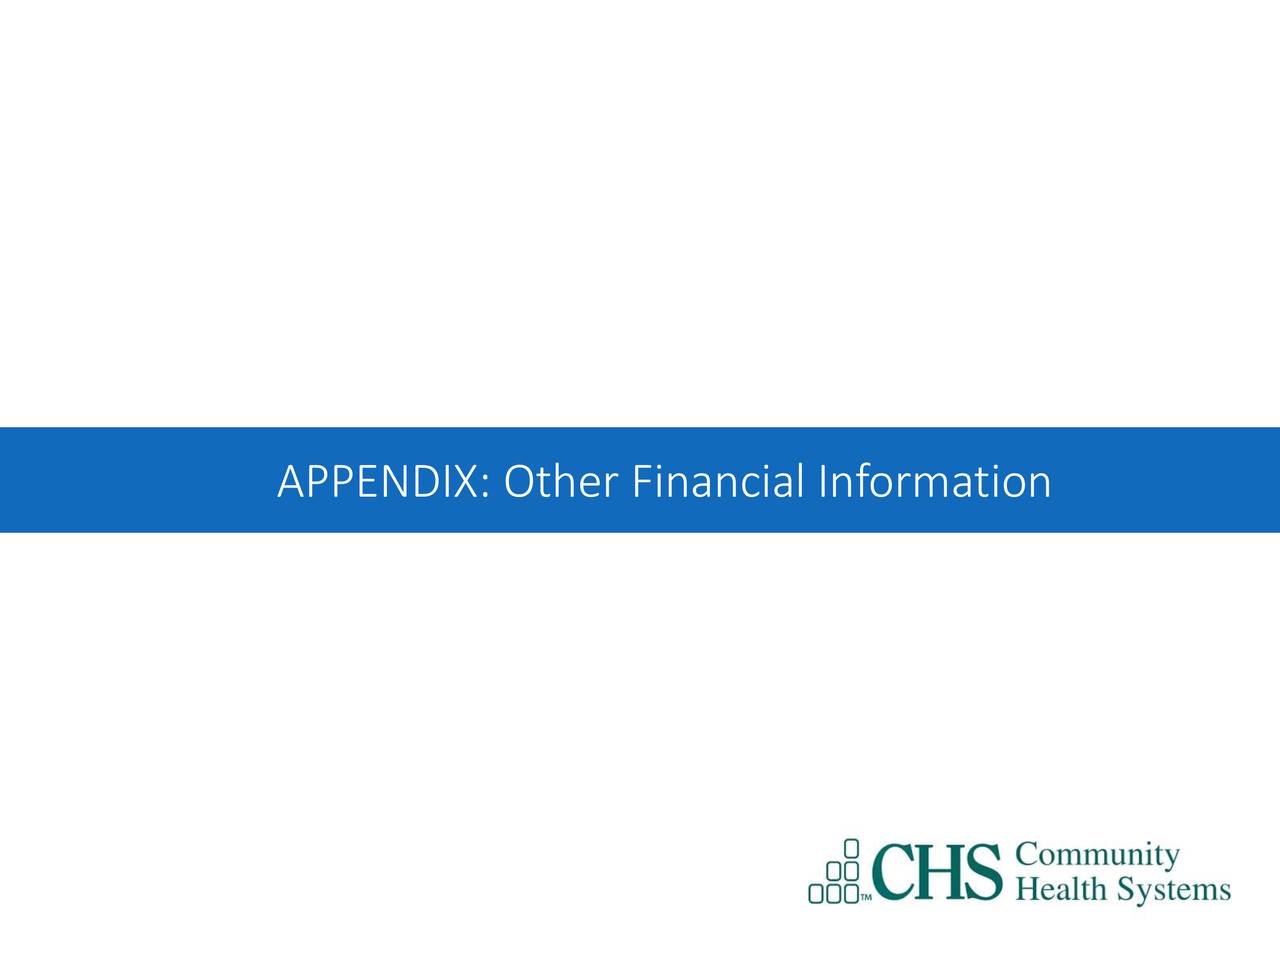 APPENDIX: Other Financial Information